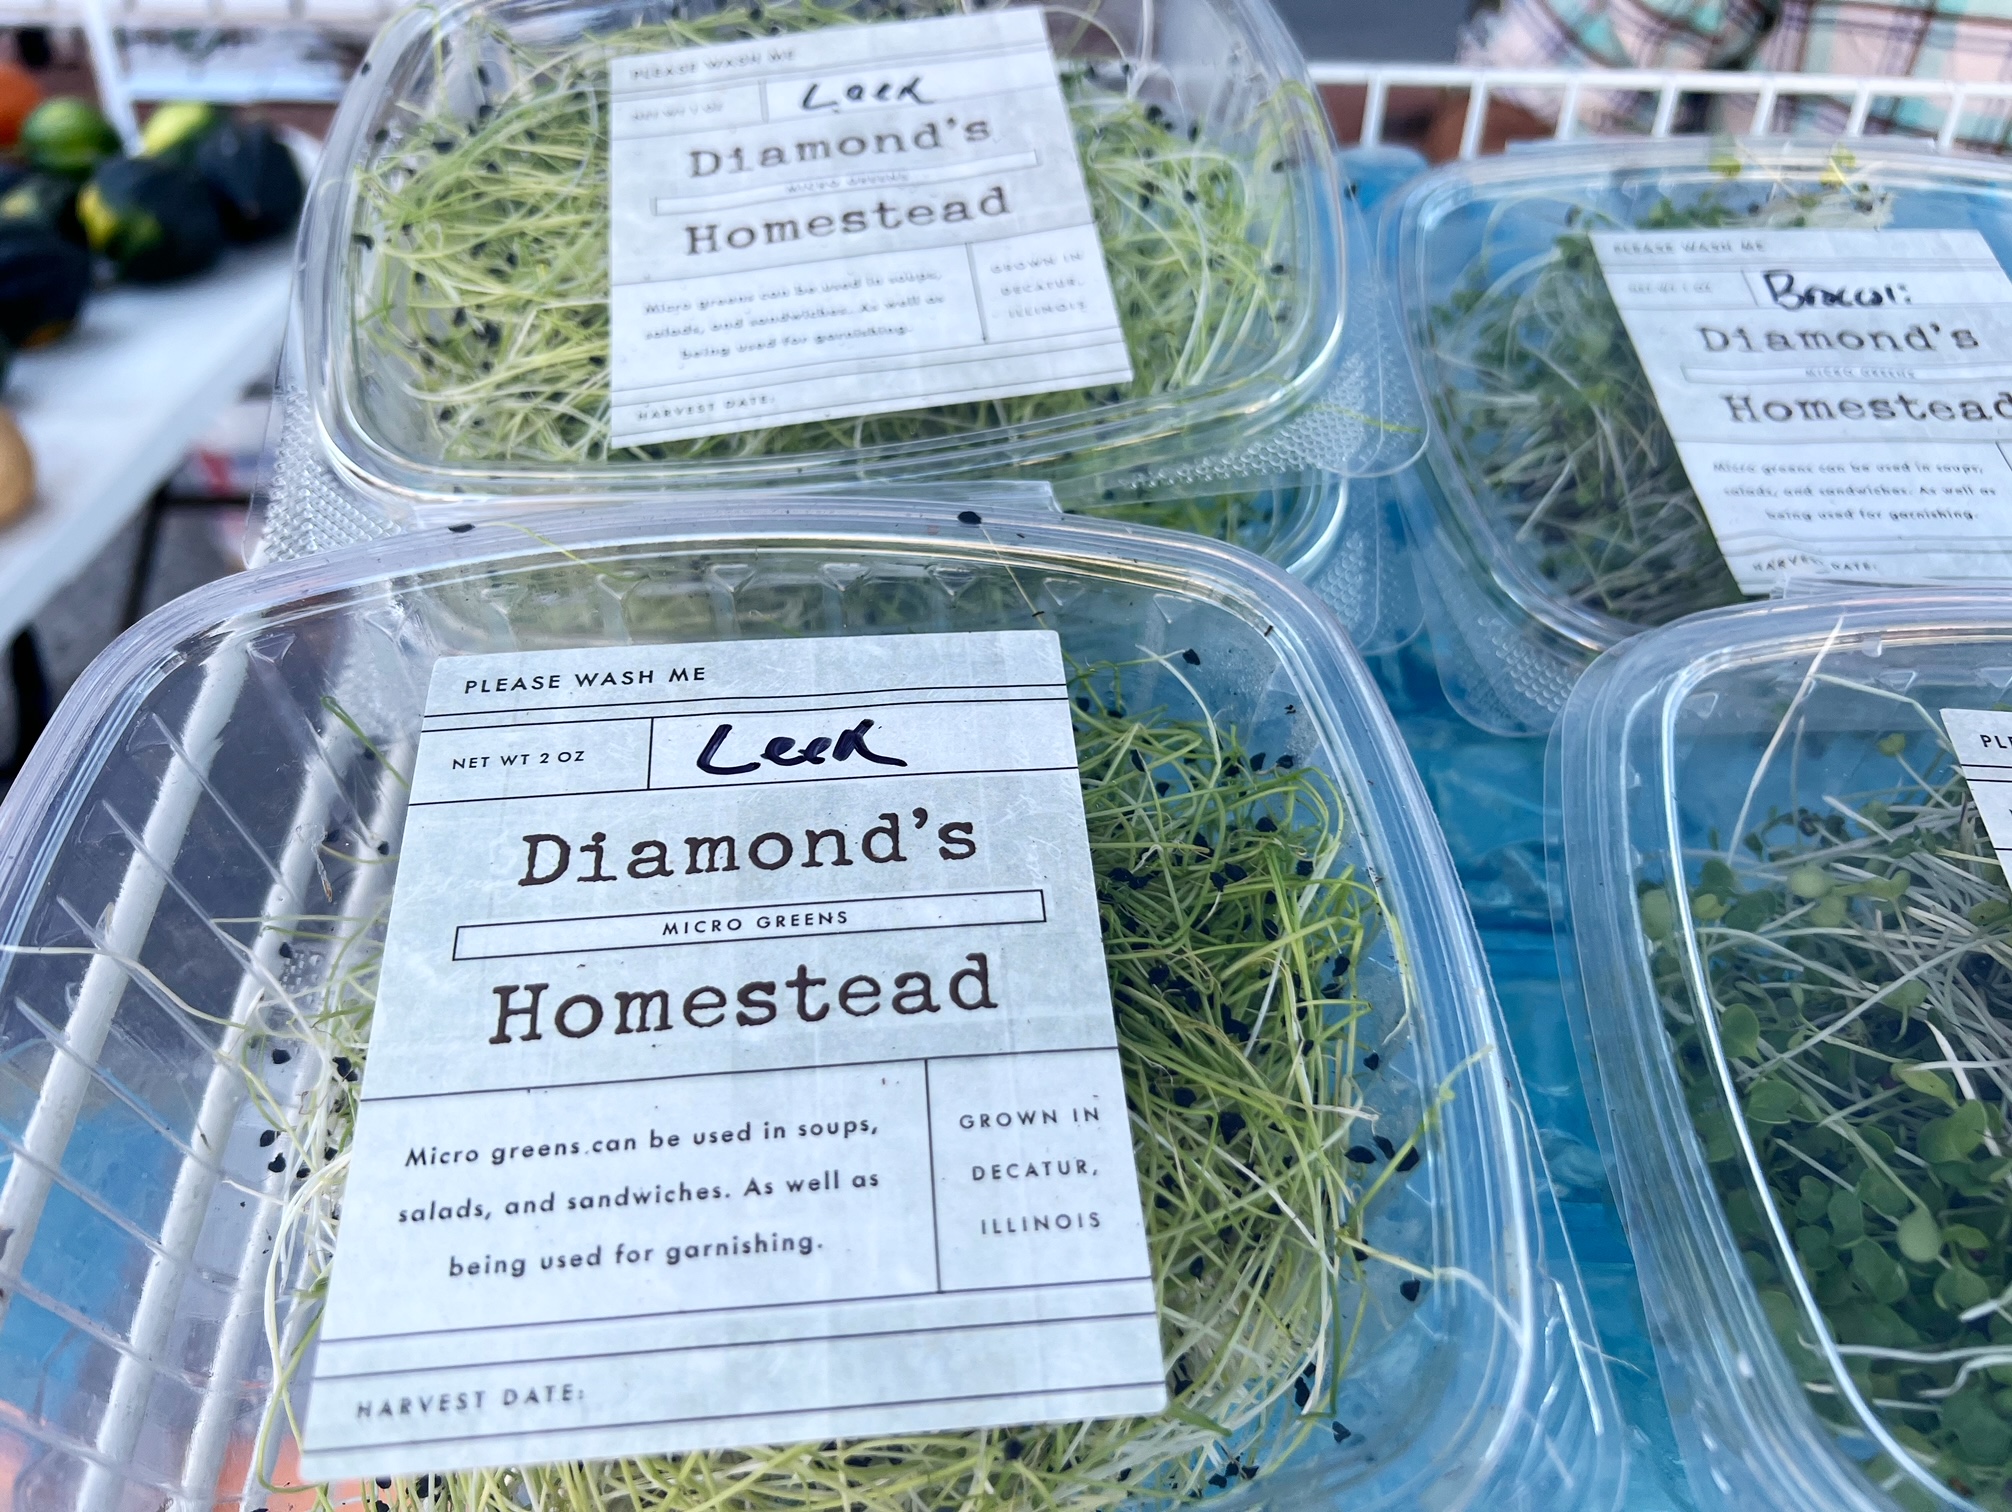 A close up image of leek microgreens in composible packaging. Photo by Alyssa Buckley.